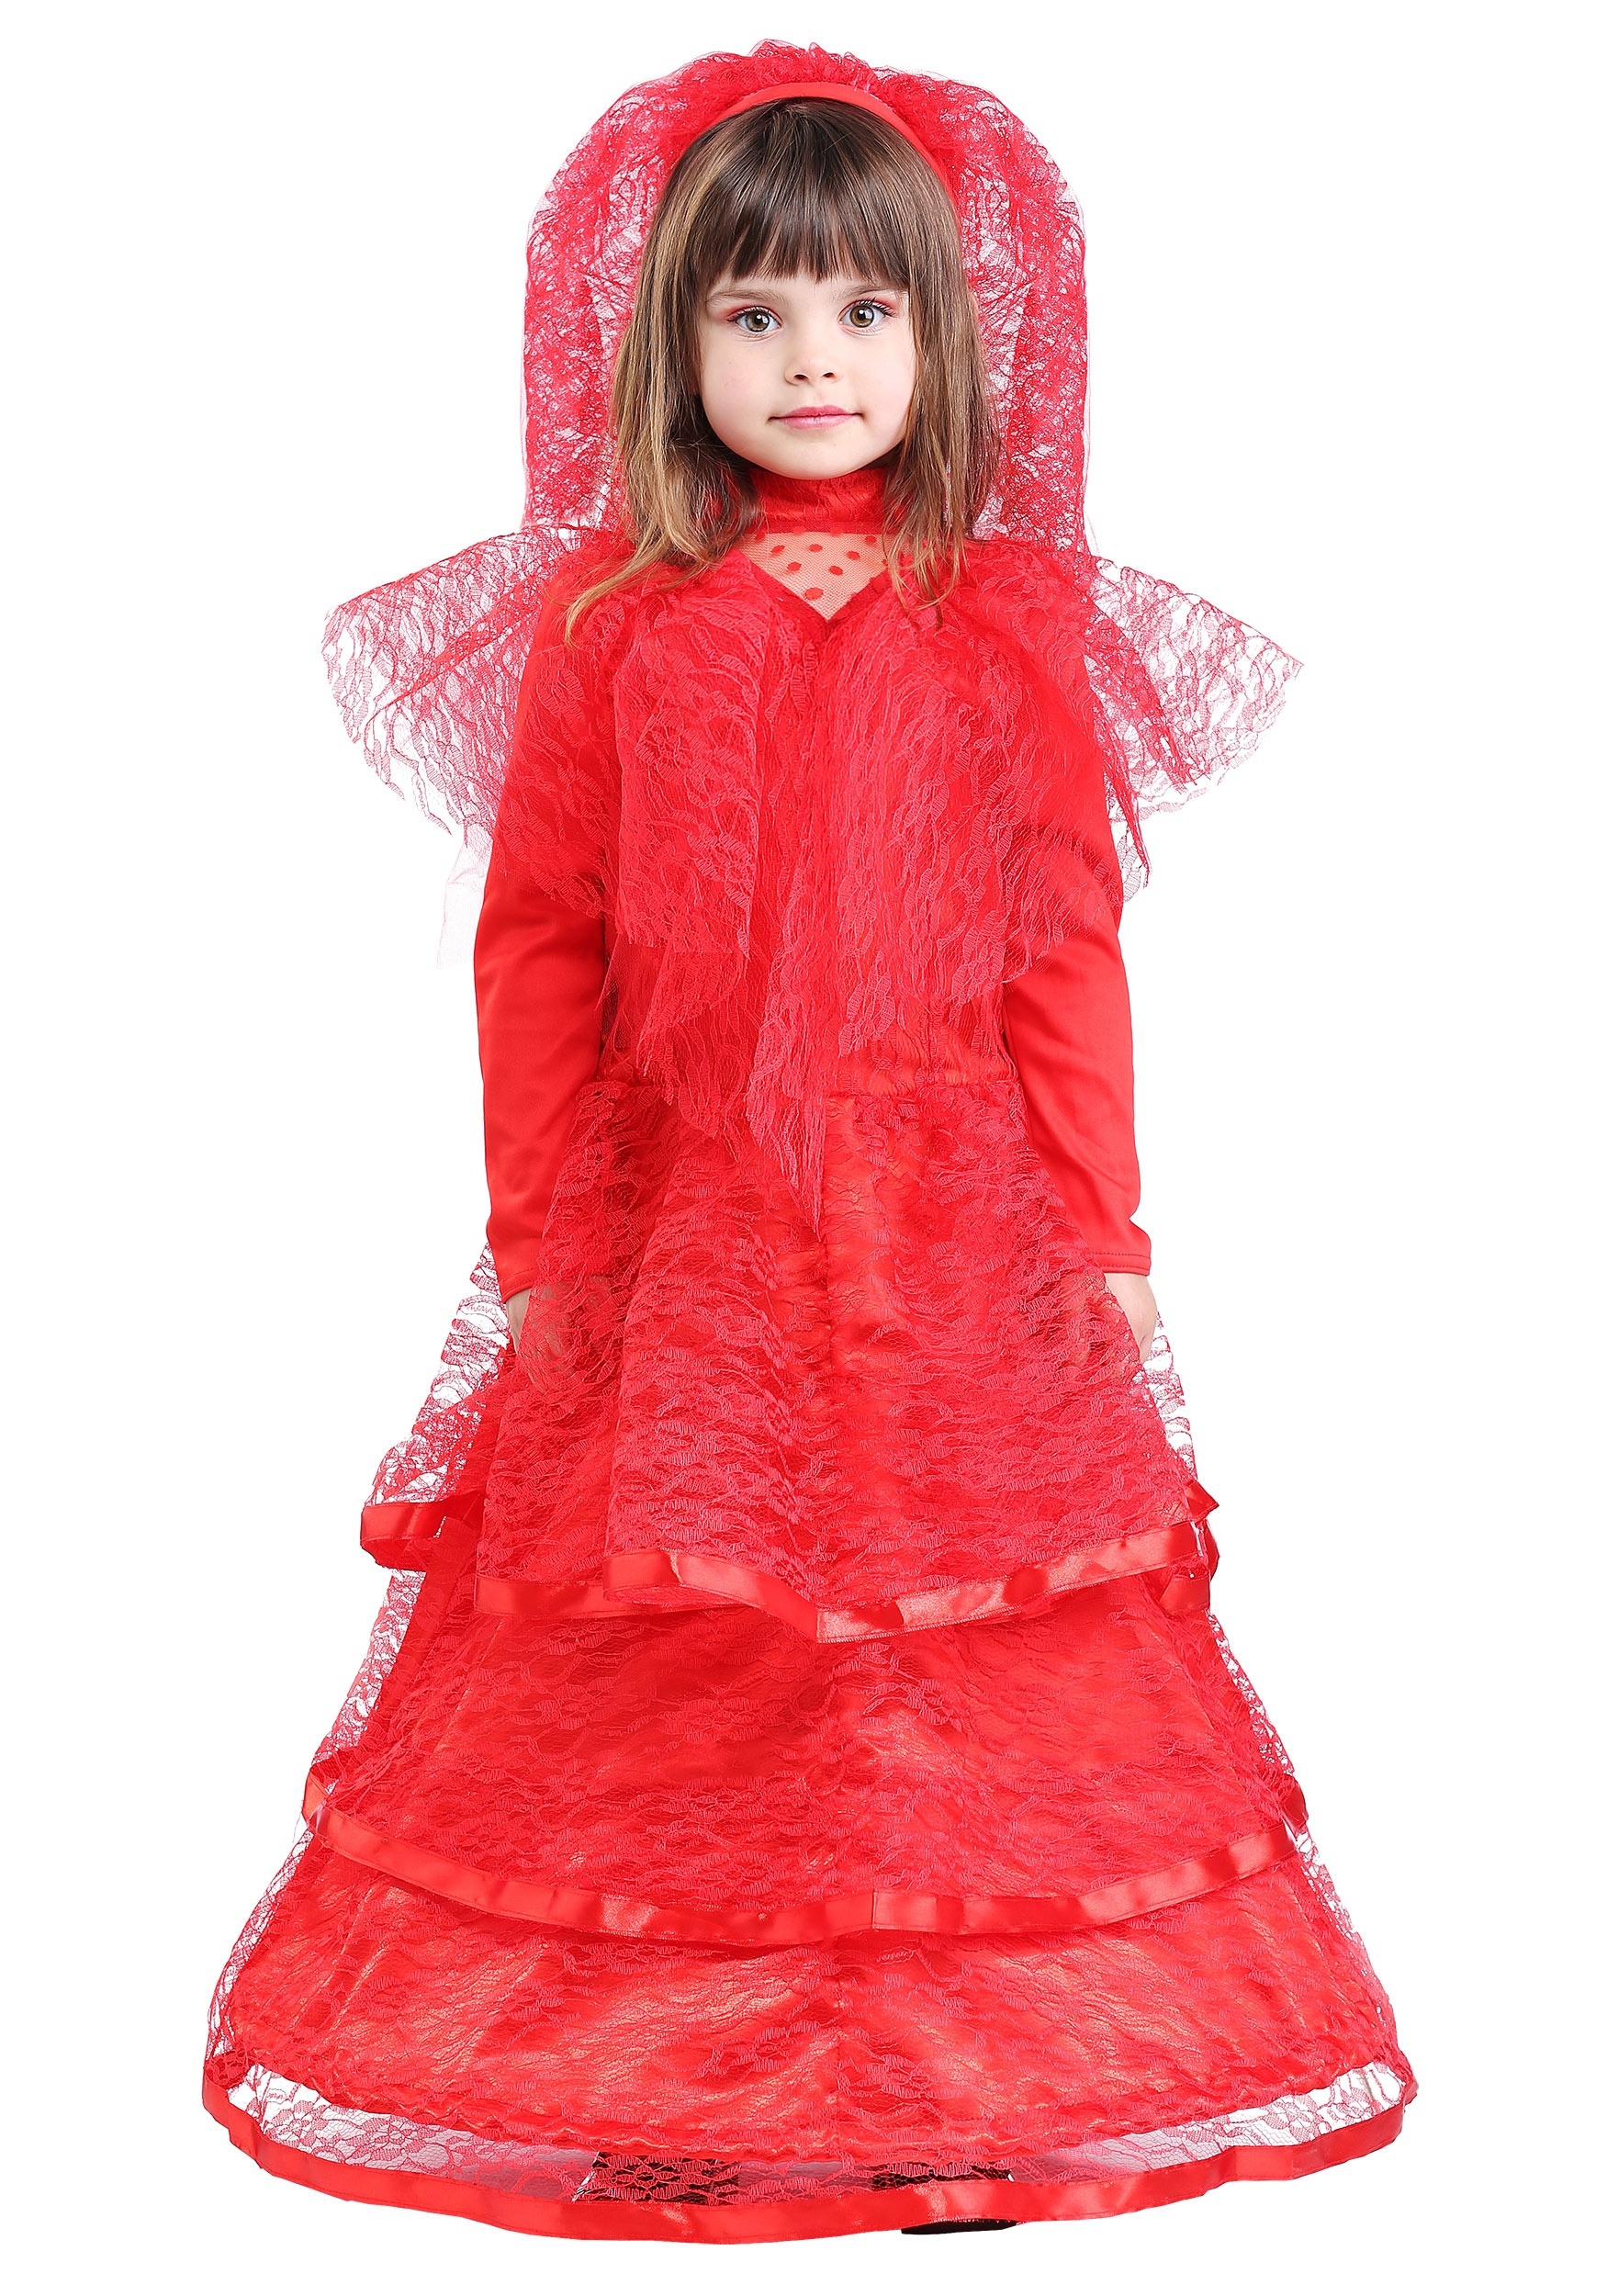 Red Gothic Wedding Dress Costume for Toddlers